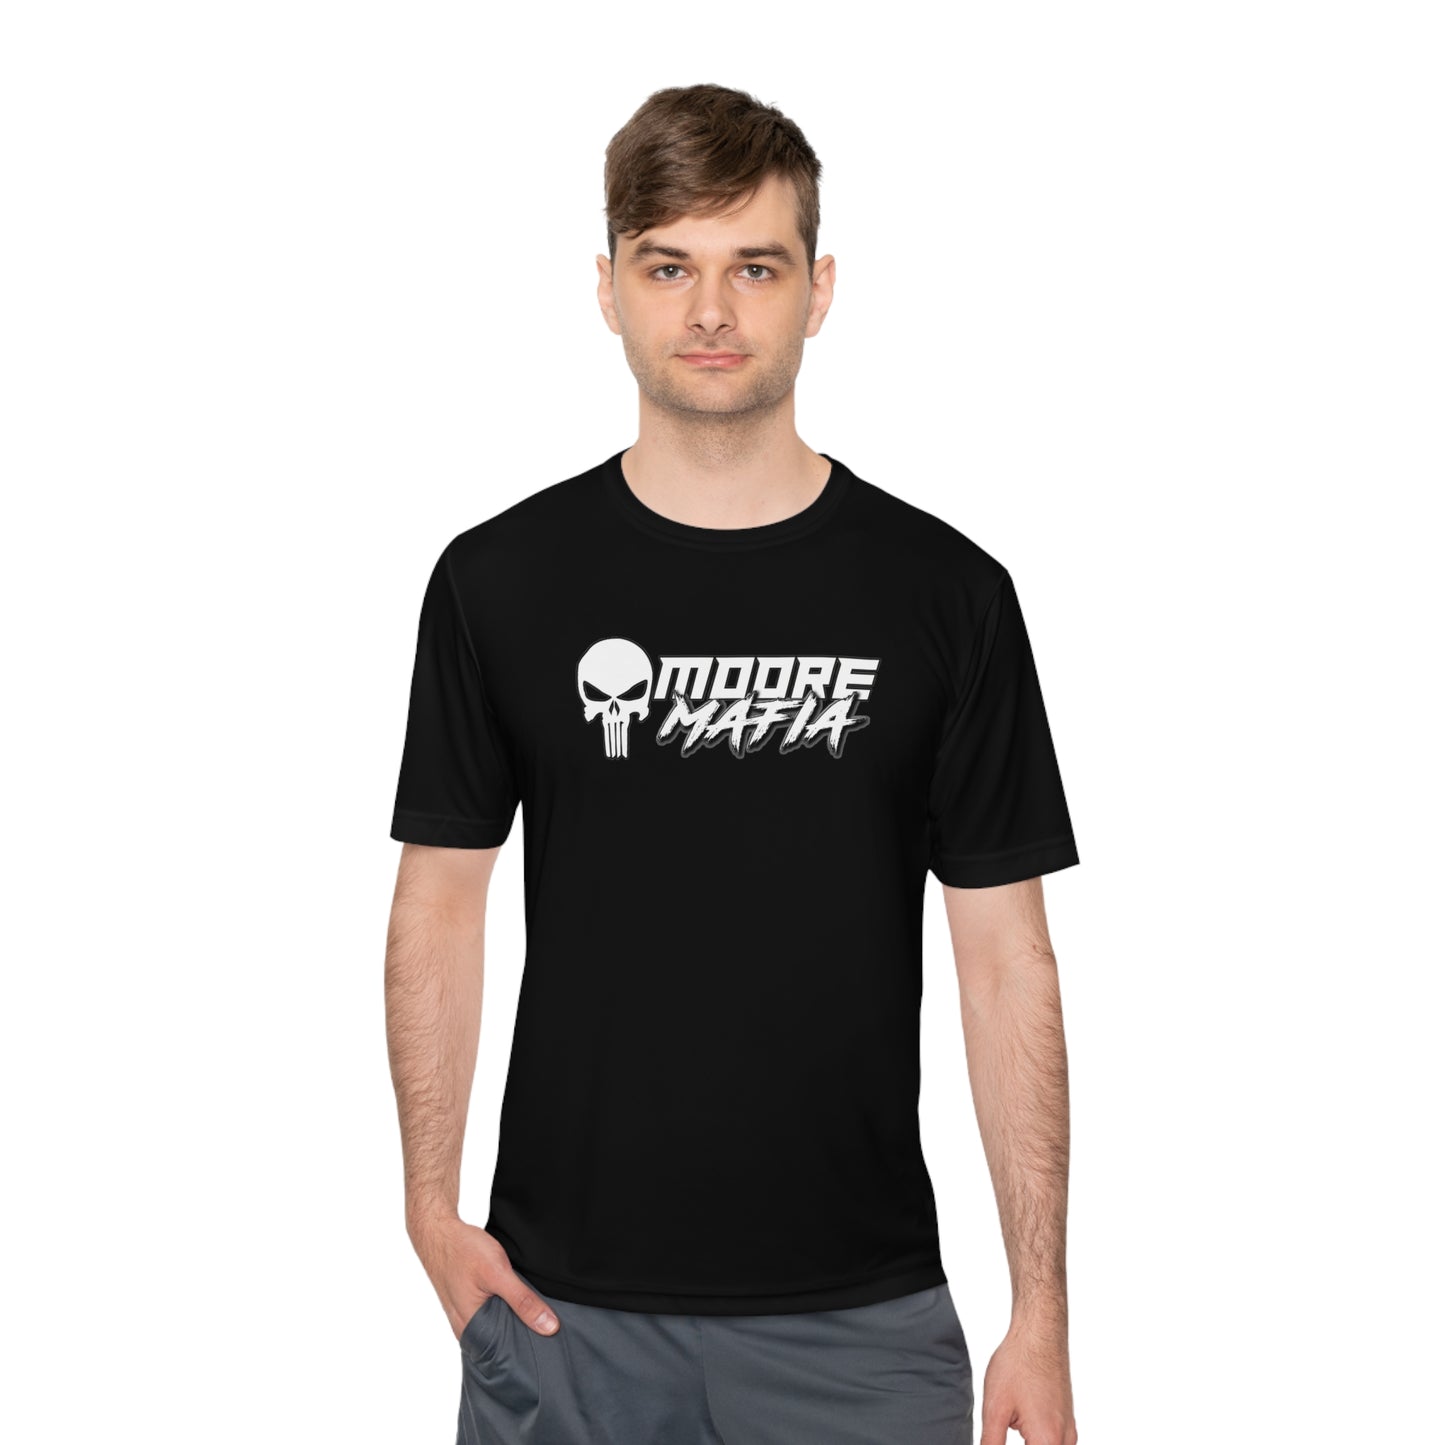 Only Boost Unisex Moisture Wicking Tee